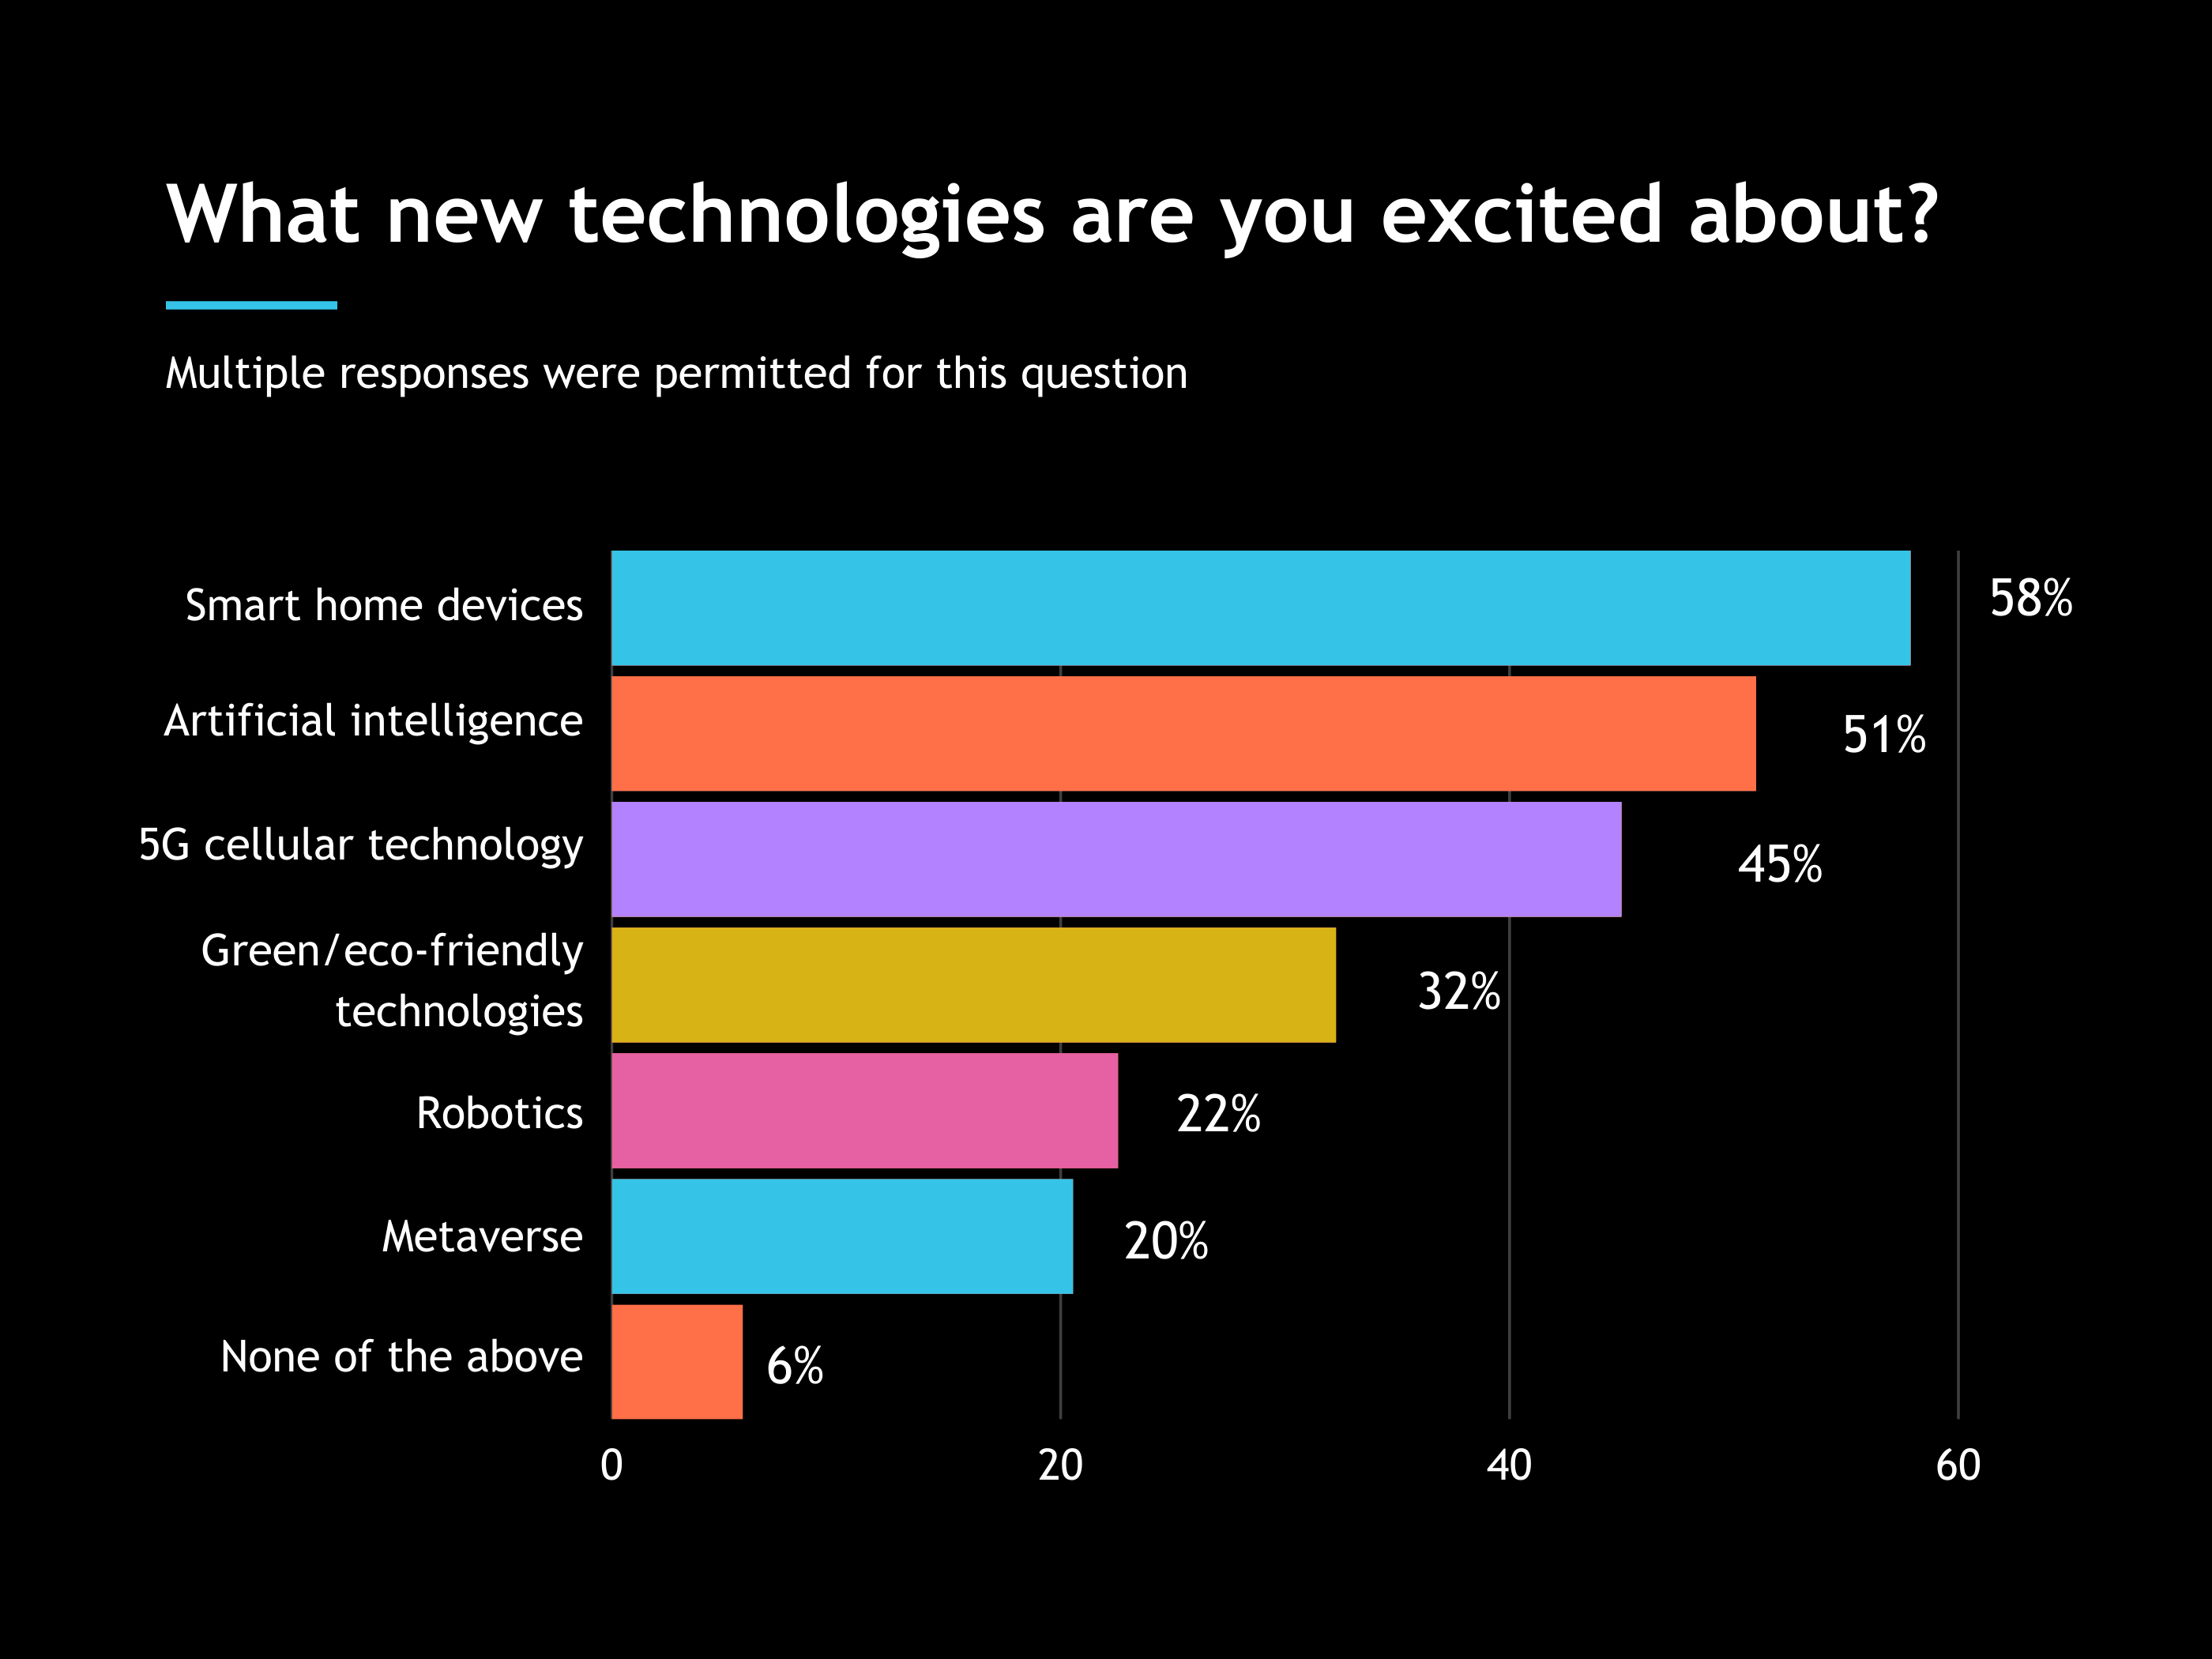 What new technologies are you excited about?